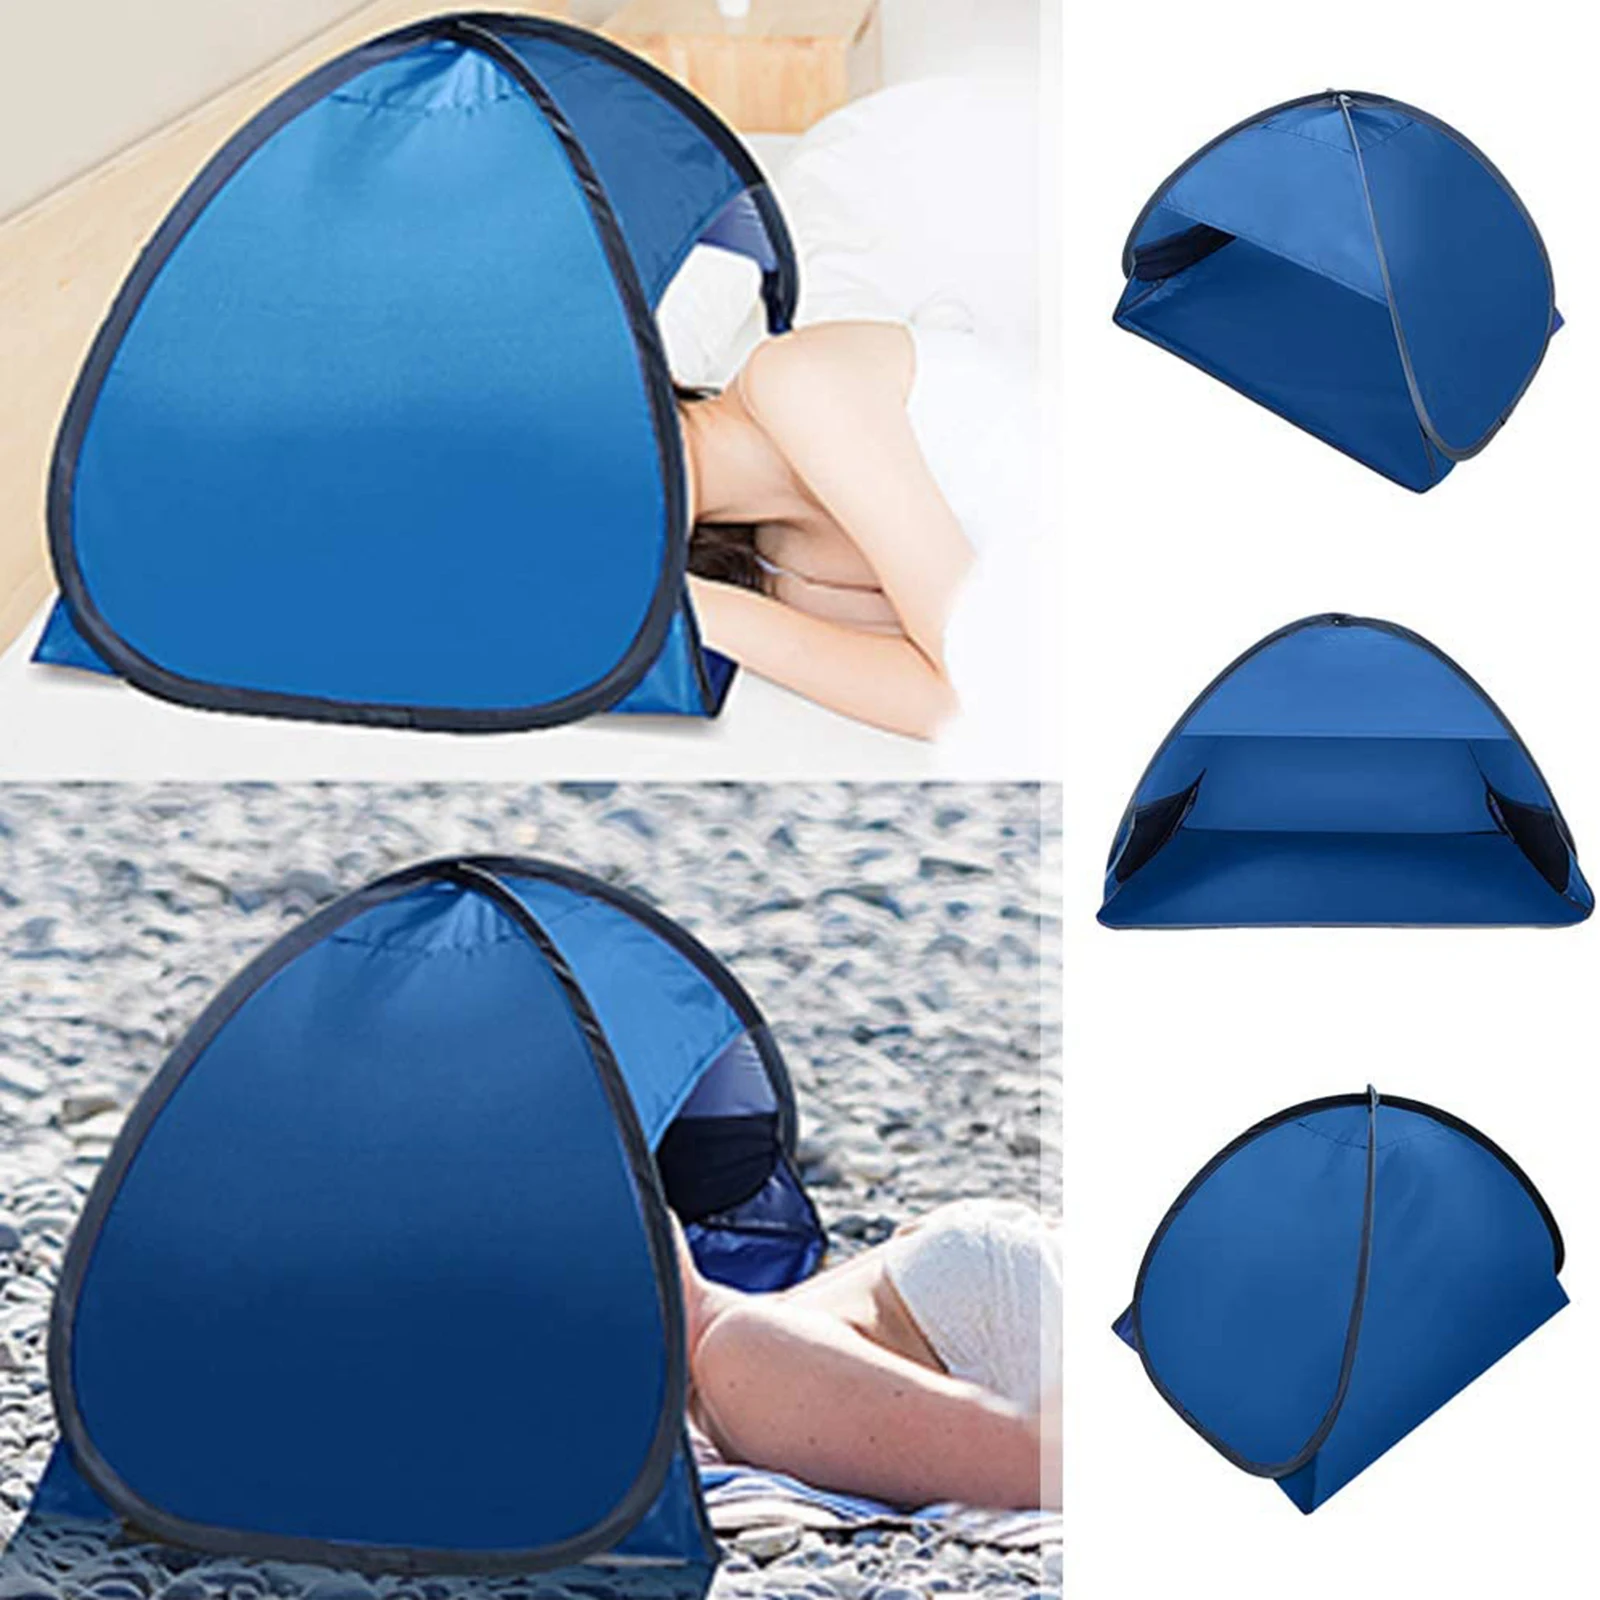 Mini Automatic Shade Tent Lounger Canopy Beach Tents Sun Shelter Anti-UV Pet Tent Outdoor Picnic Beach Camping Fishing Hiking